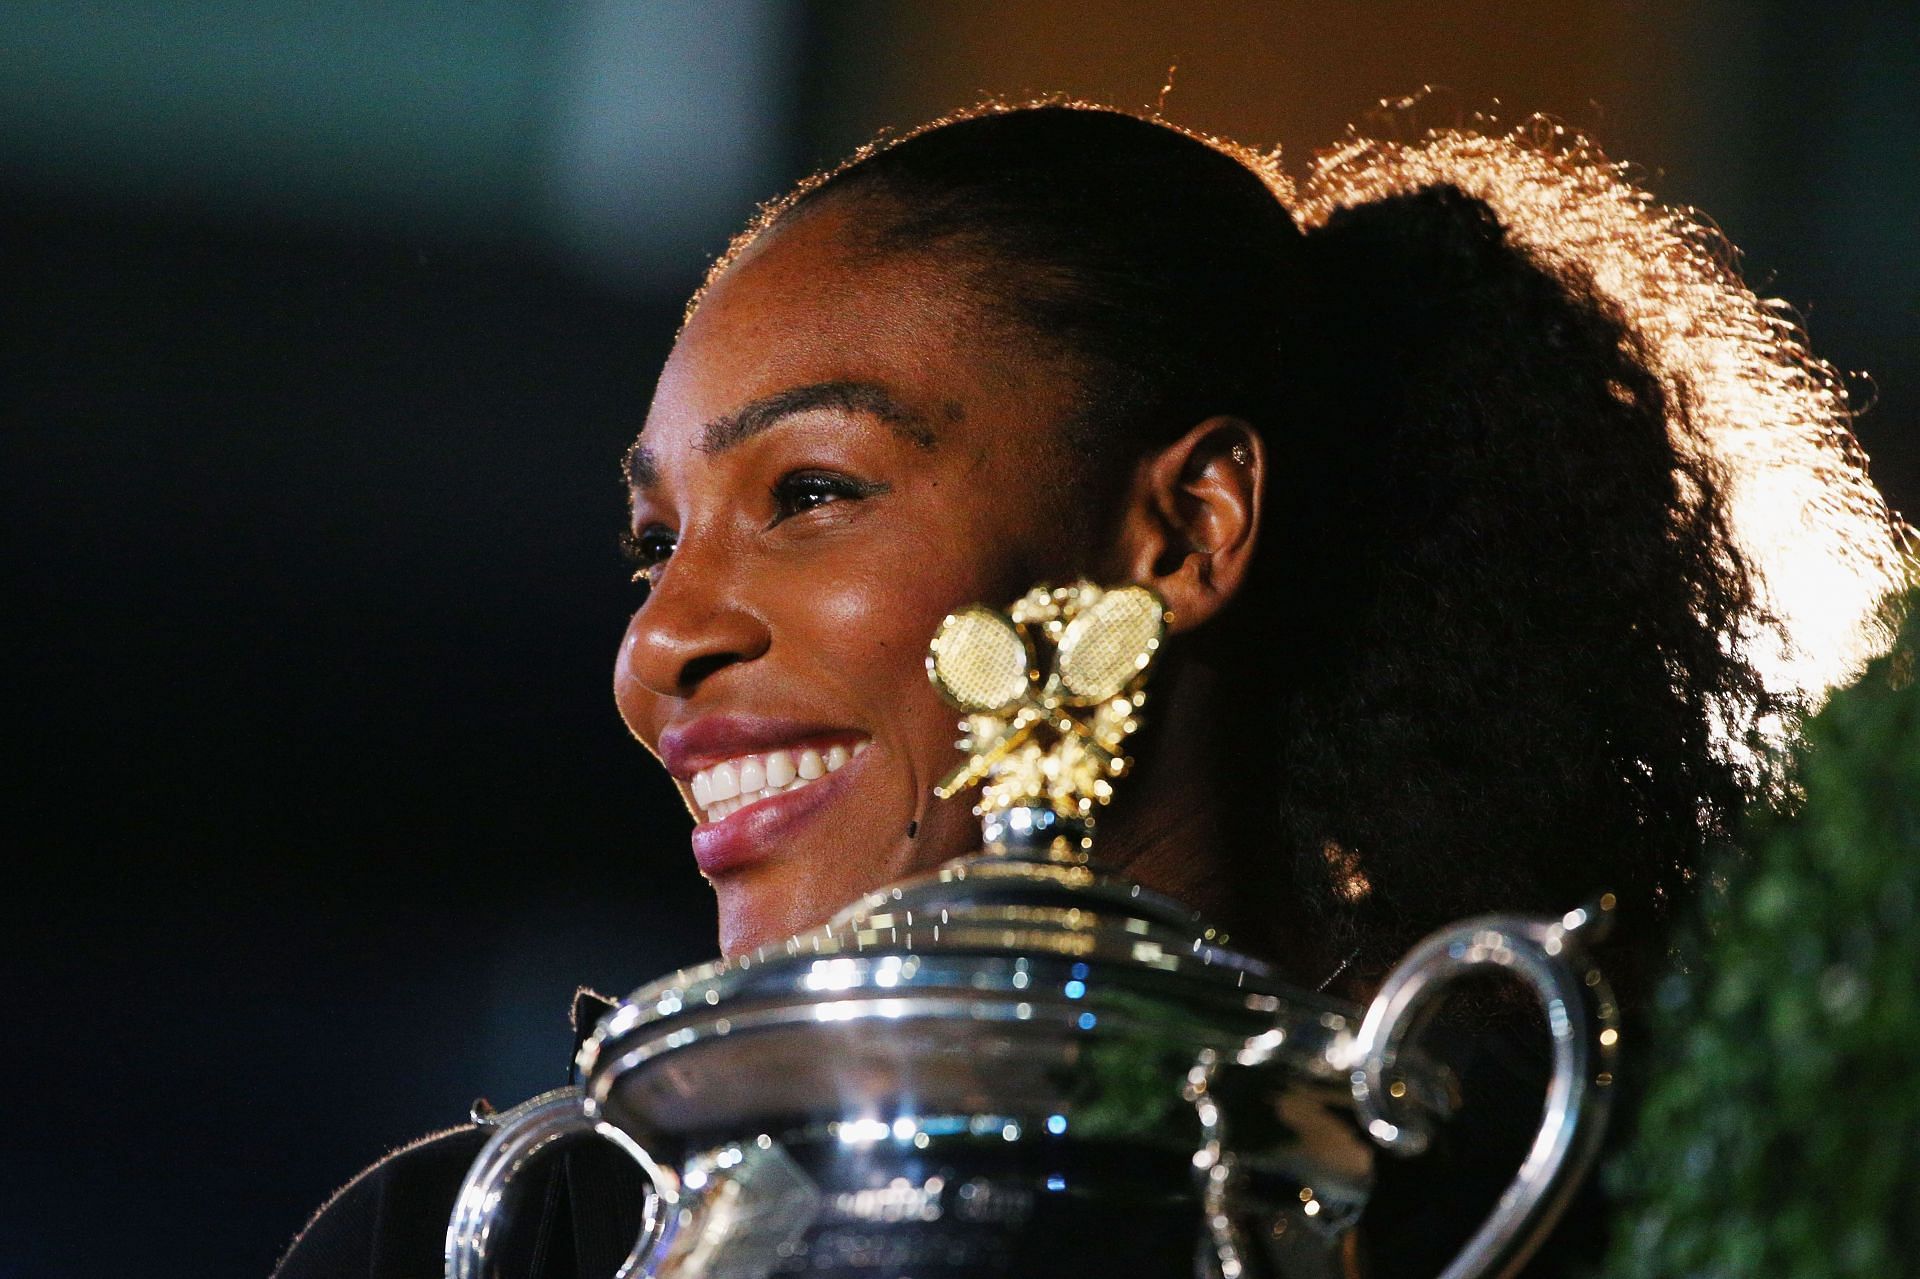 Serena Williams won her 23rd Major at the Australian Open 2017